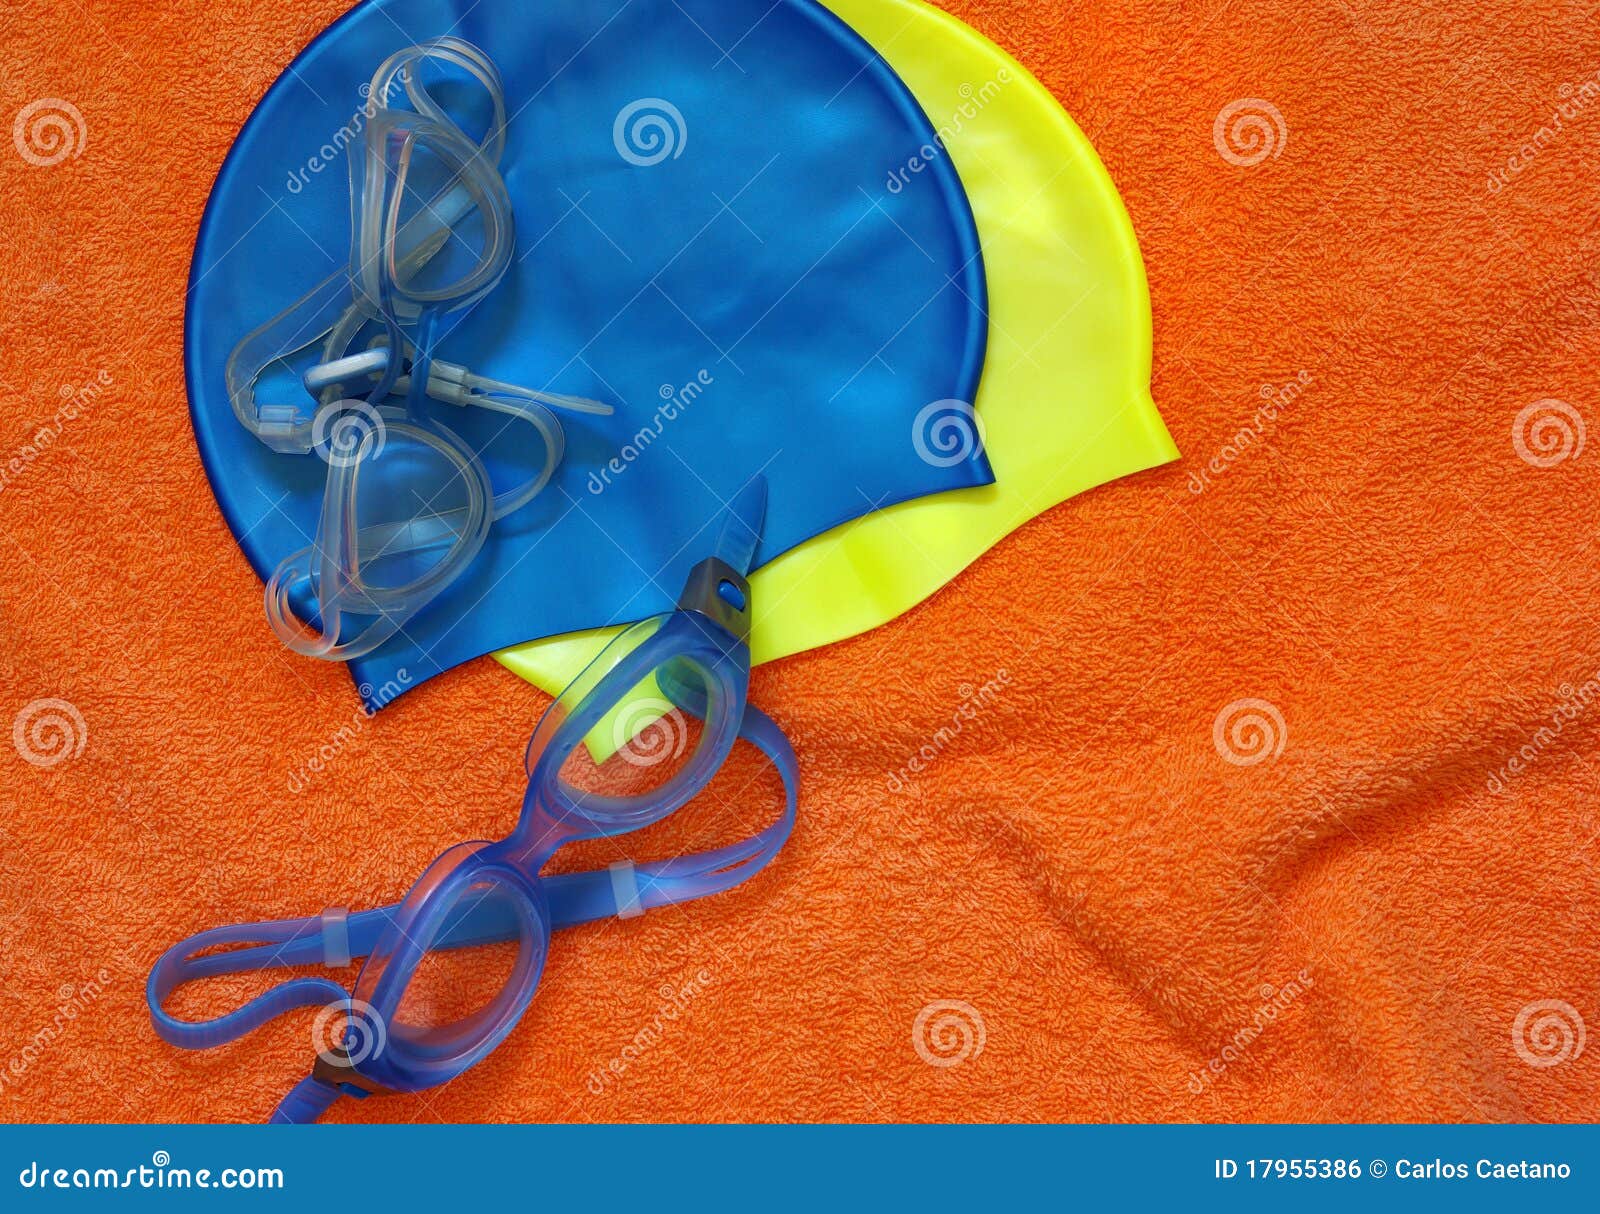 Swimming gear stock photo. Image of colorful, object - 17955386